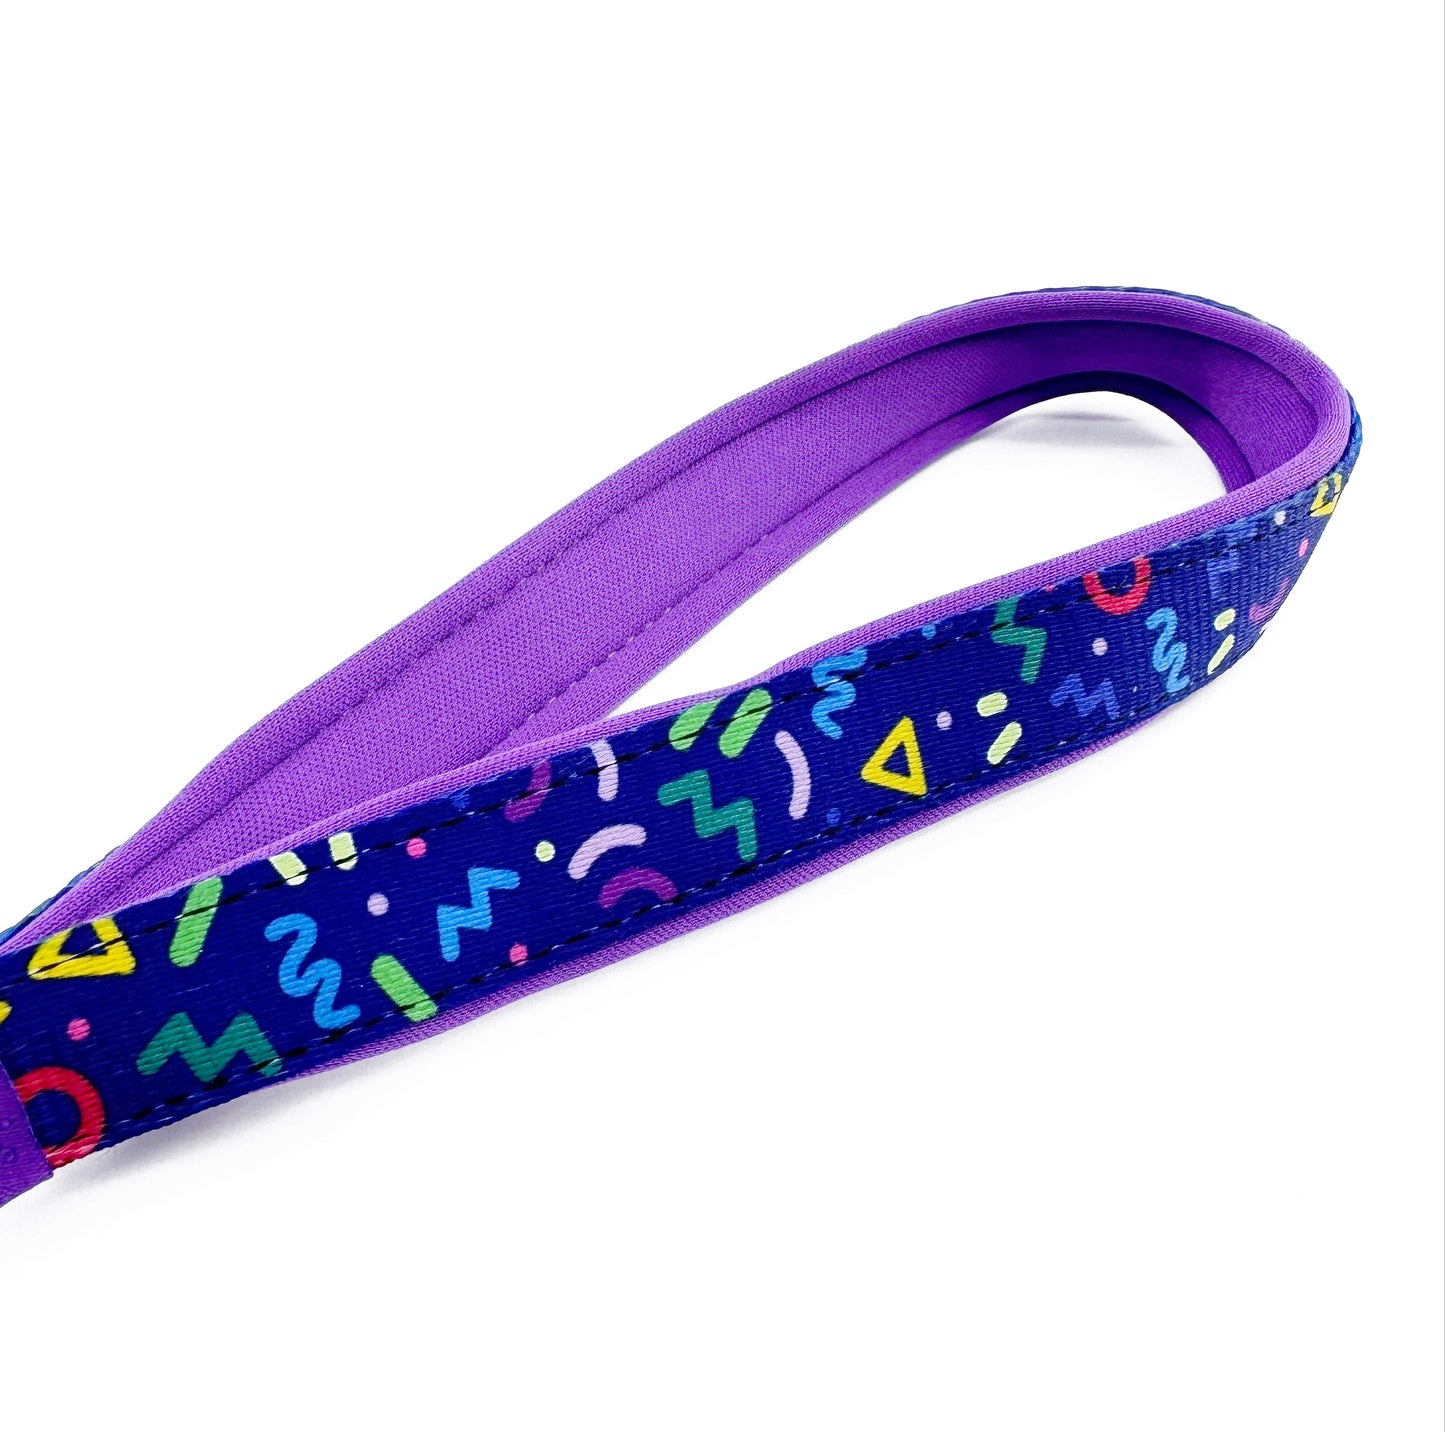 Classic Material Patterned Leash